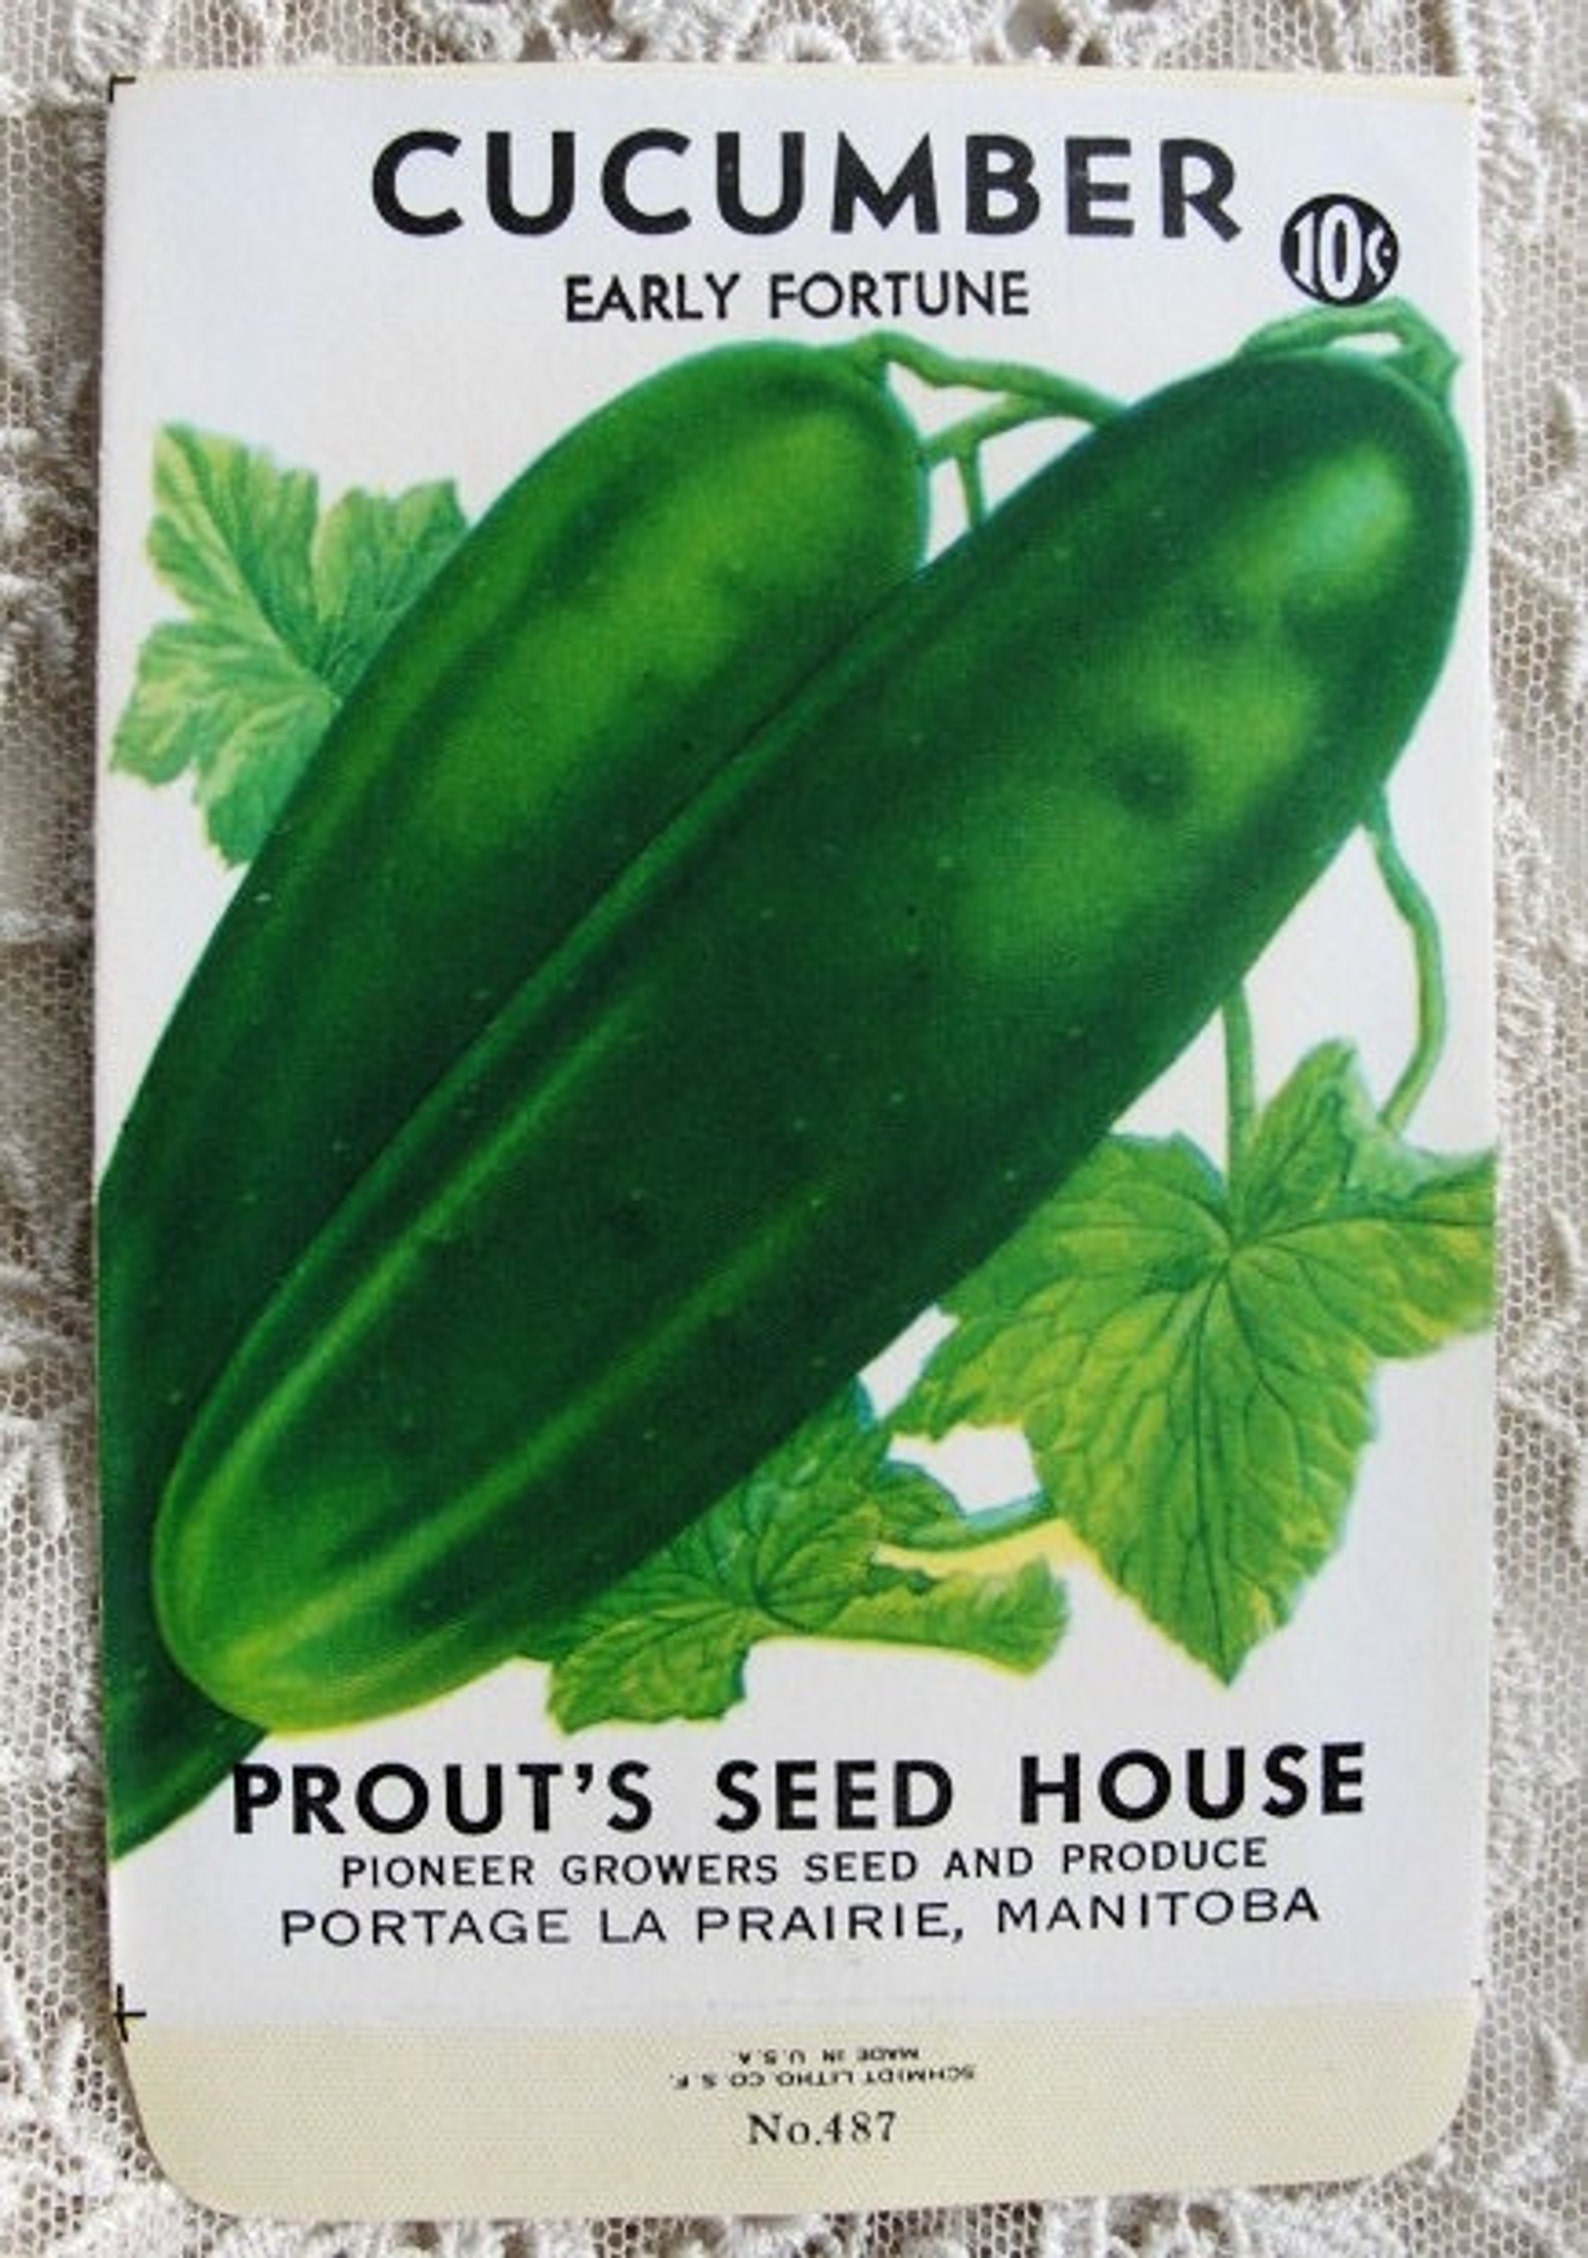 Antique SEED PACKET Colorful Vegetables Suitable To Frame Cottage Chic, Farmhouse, French Country Decor Scrapbooking Crafts Weddings Gifts